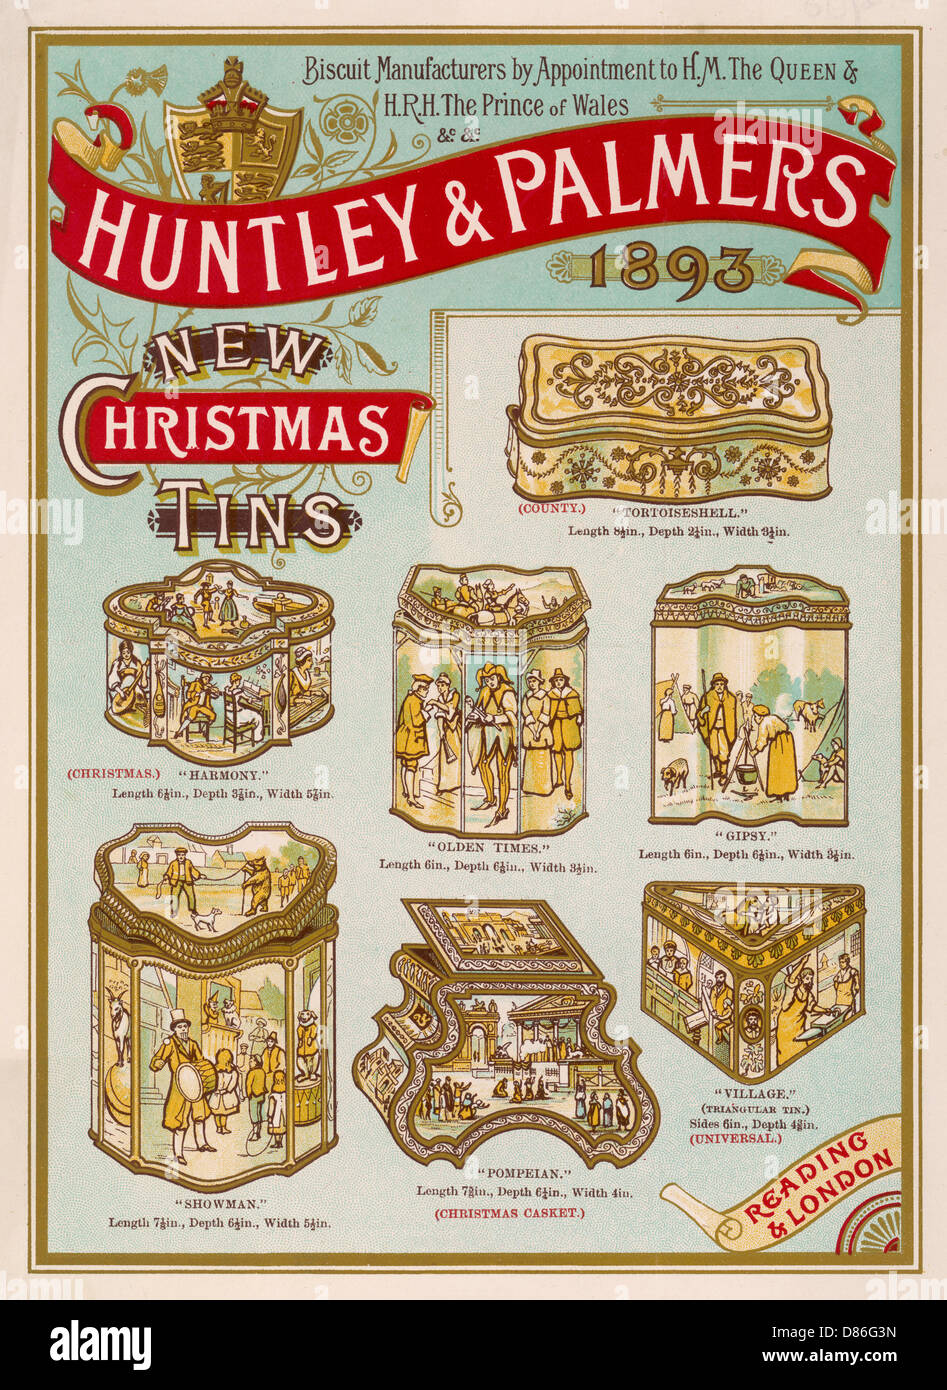 Huntley and Palmer's tin biscuits Stock Photo